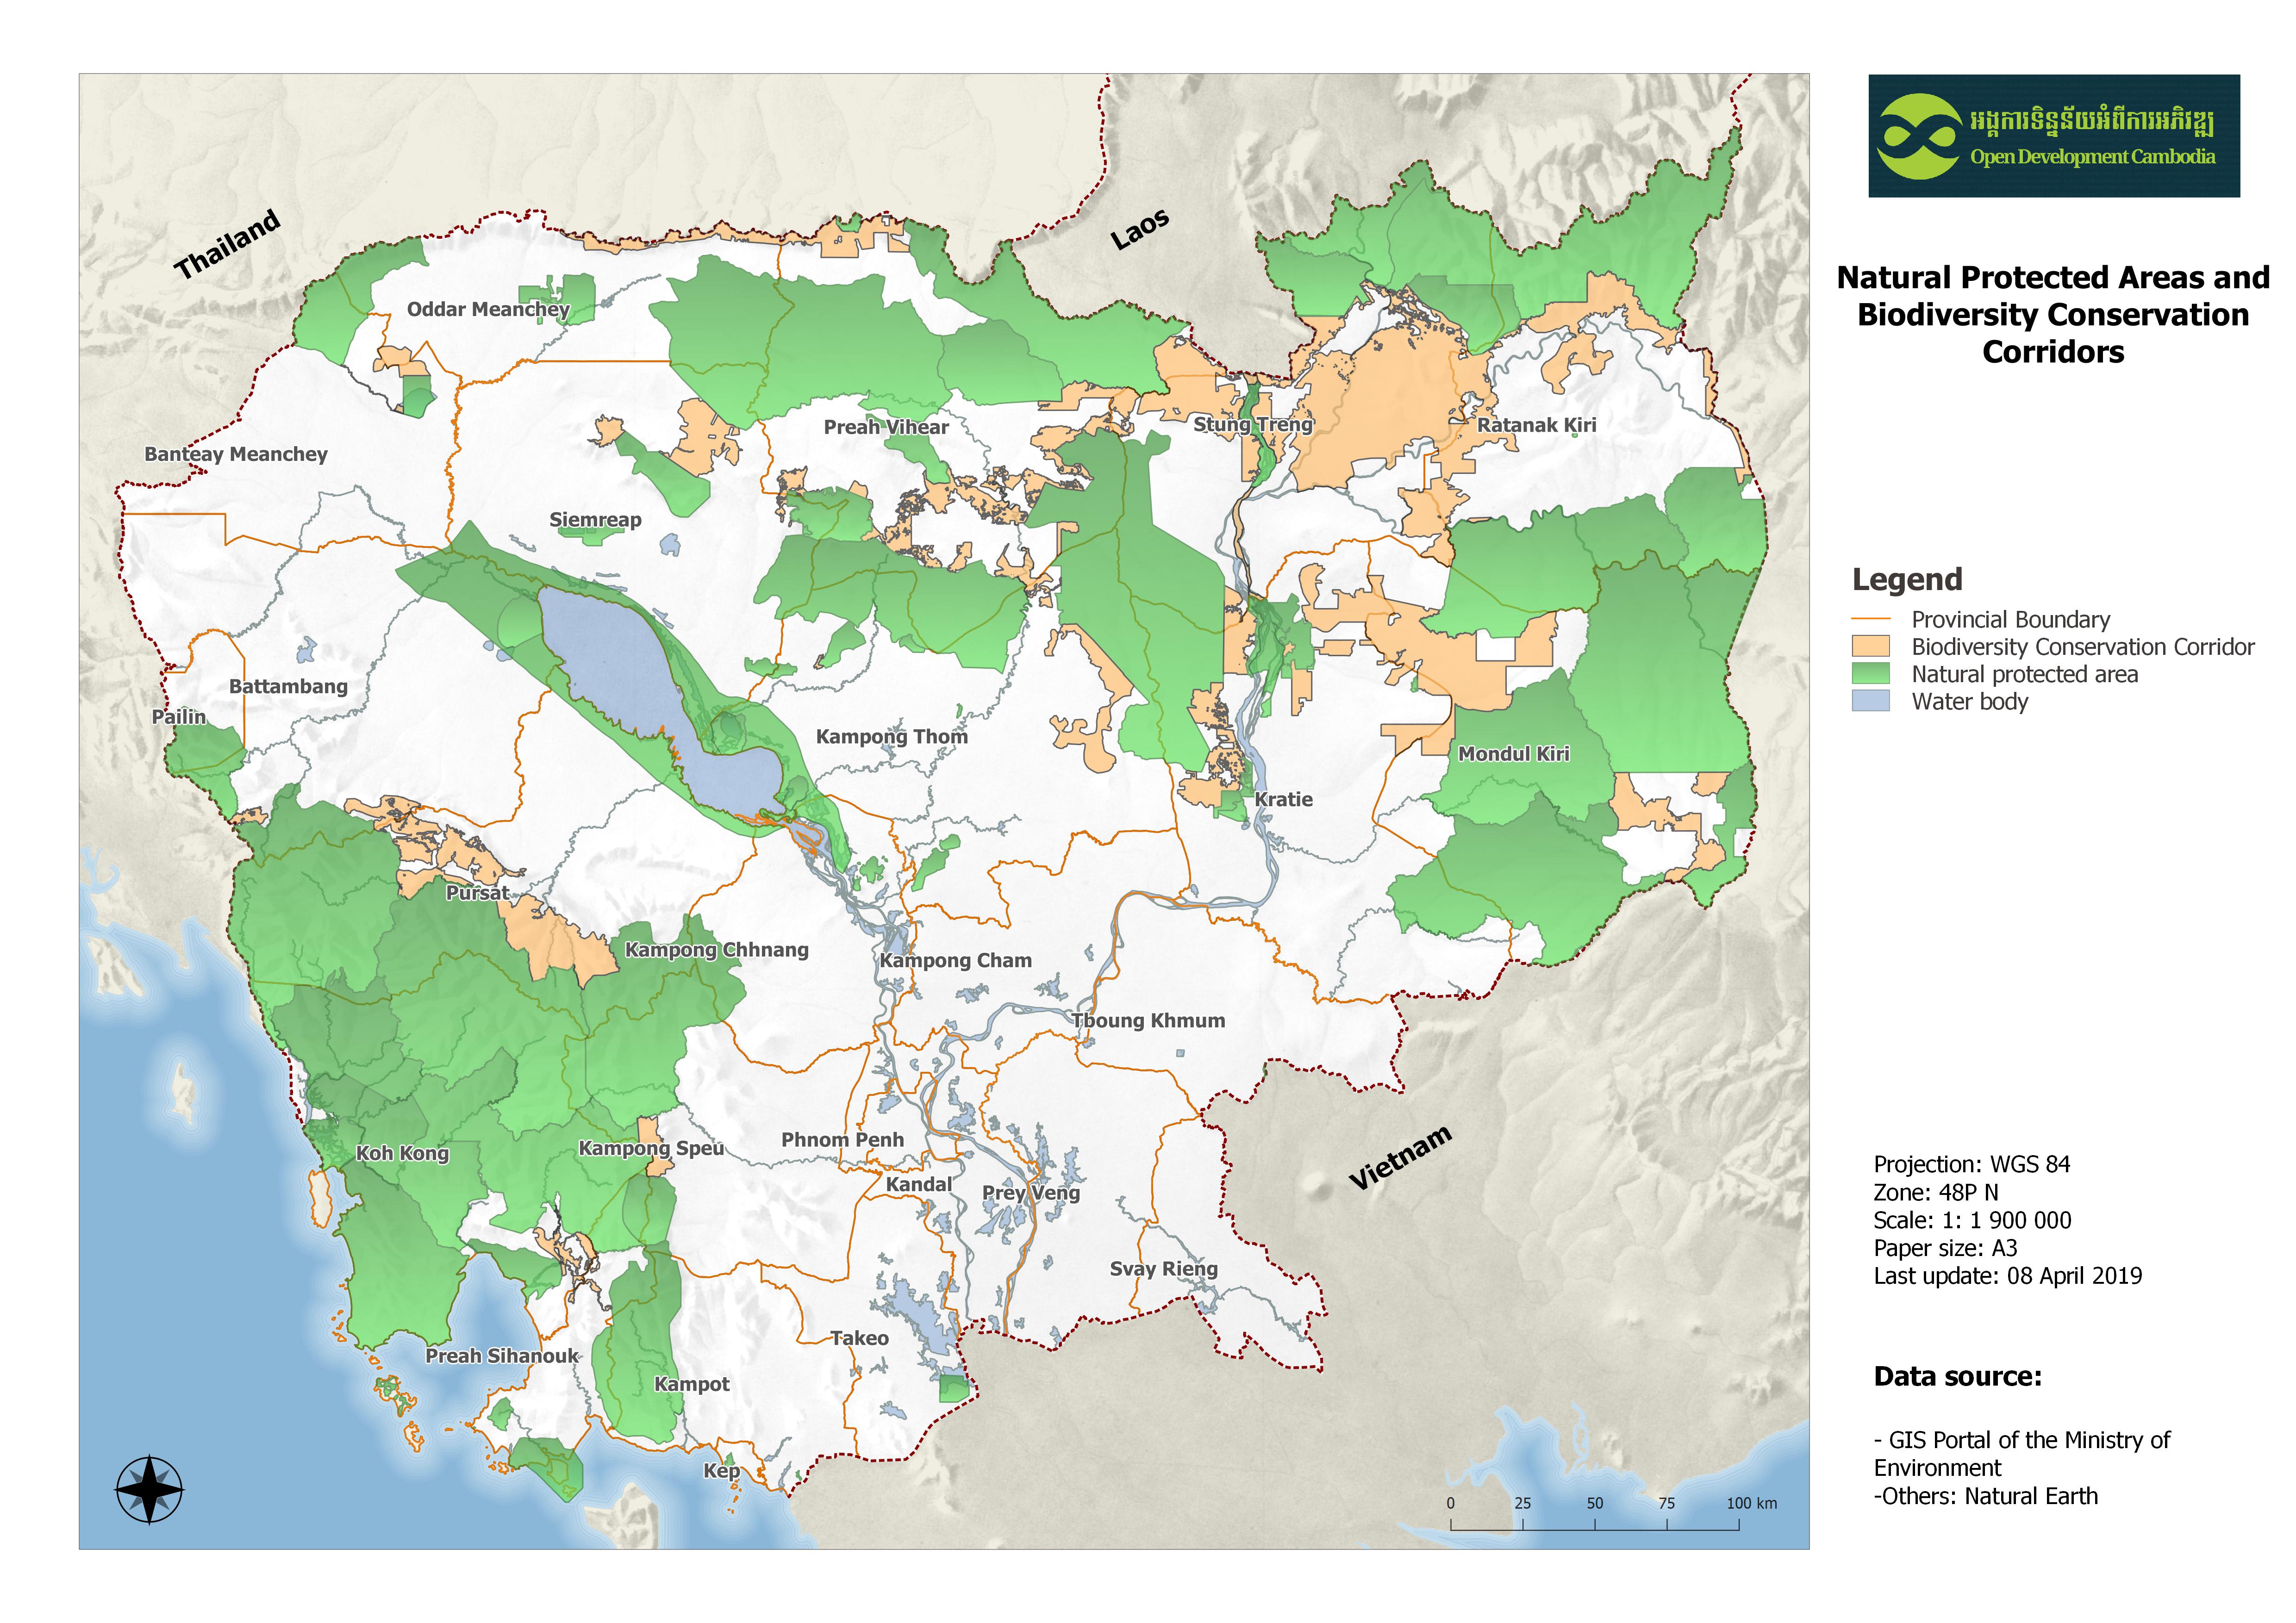 Natural protected areas and biodiversity conservation corridors